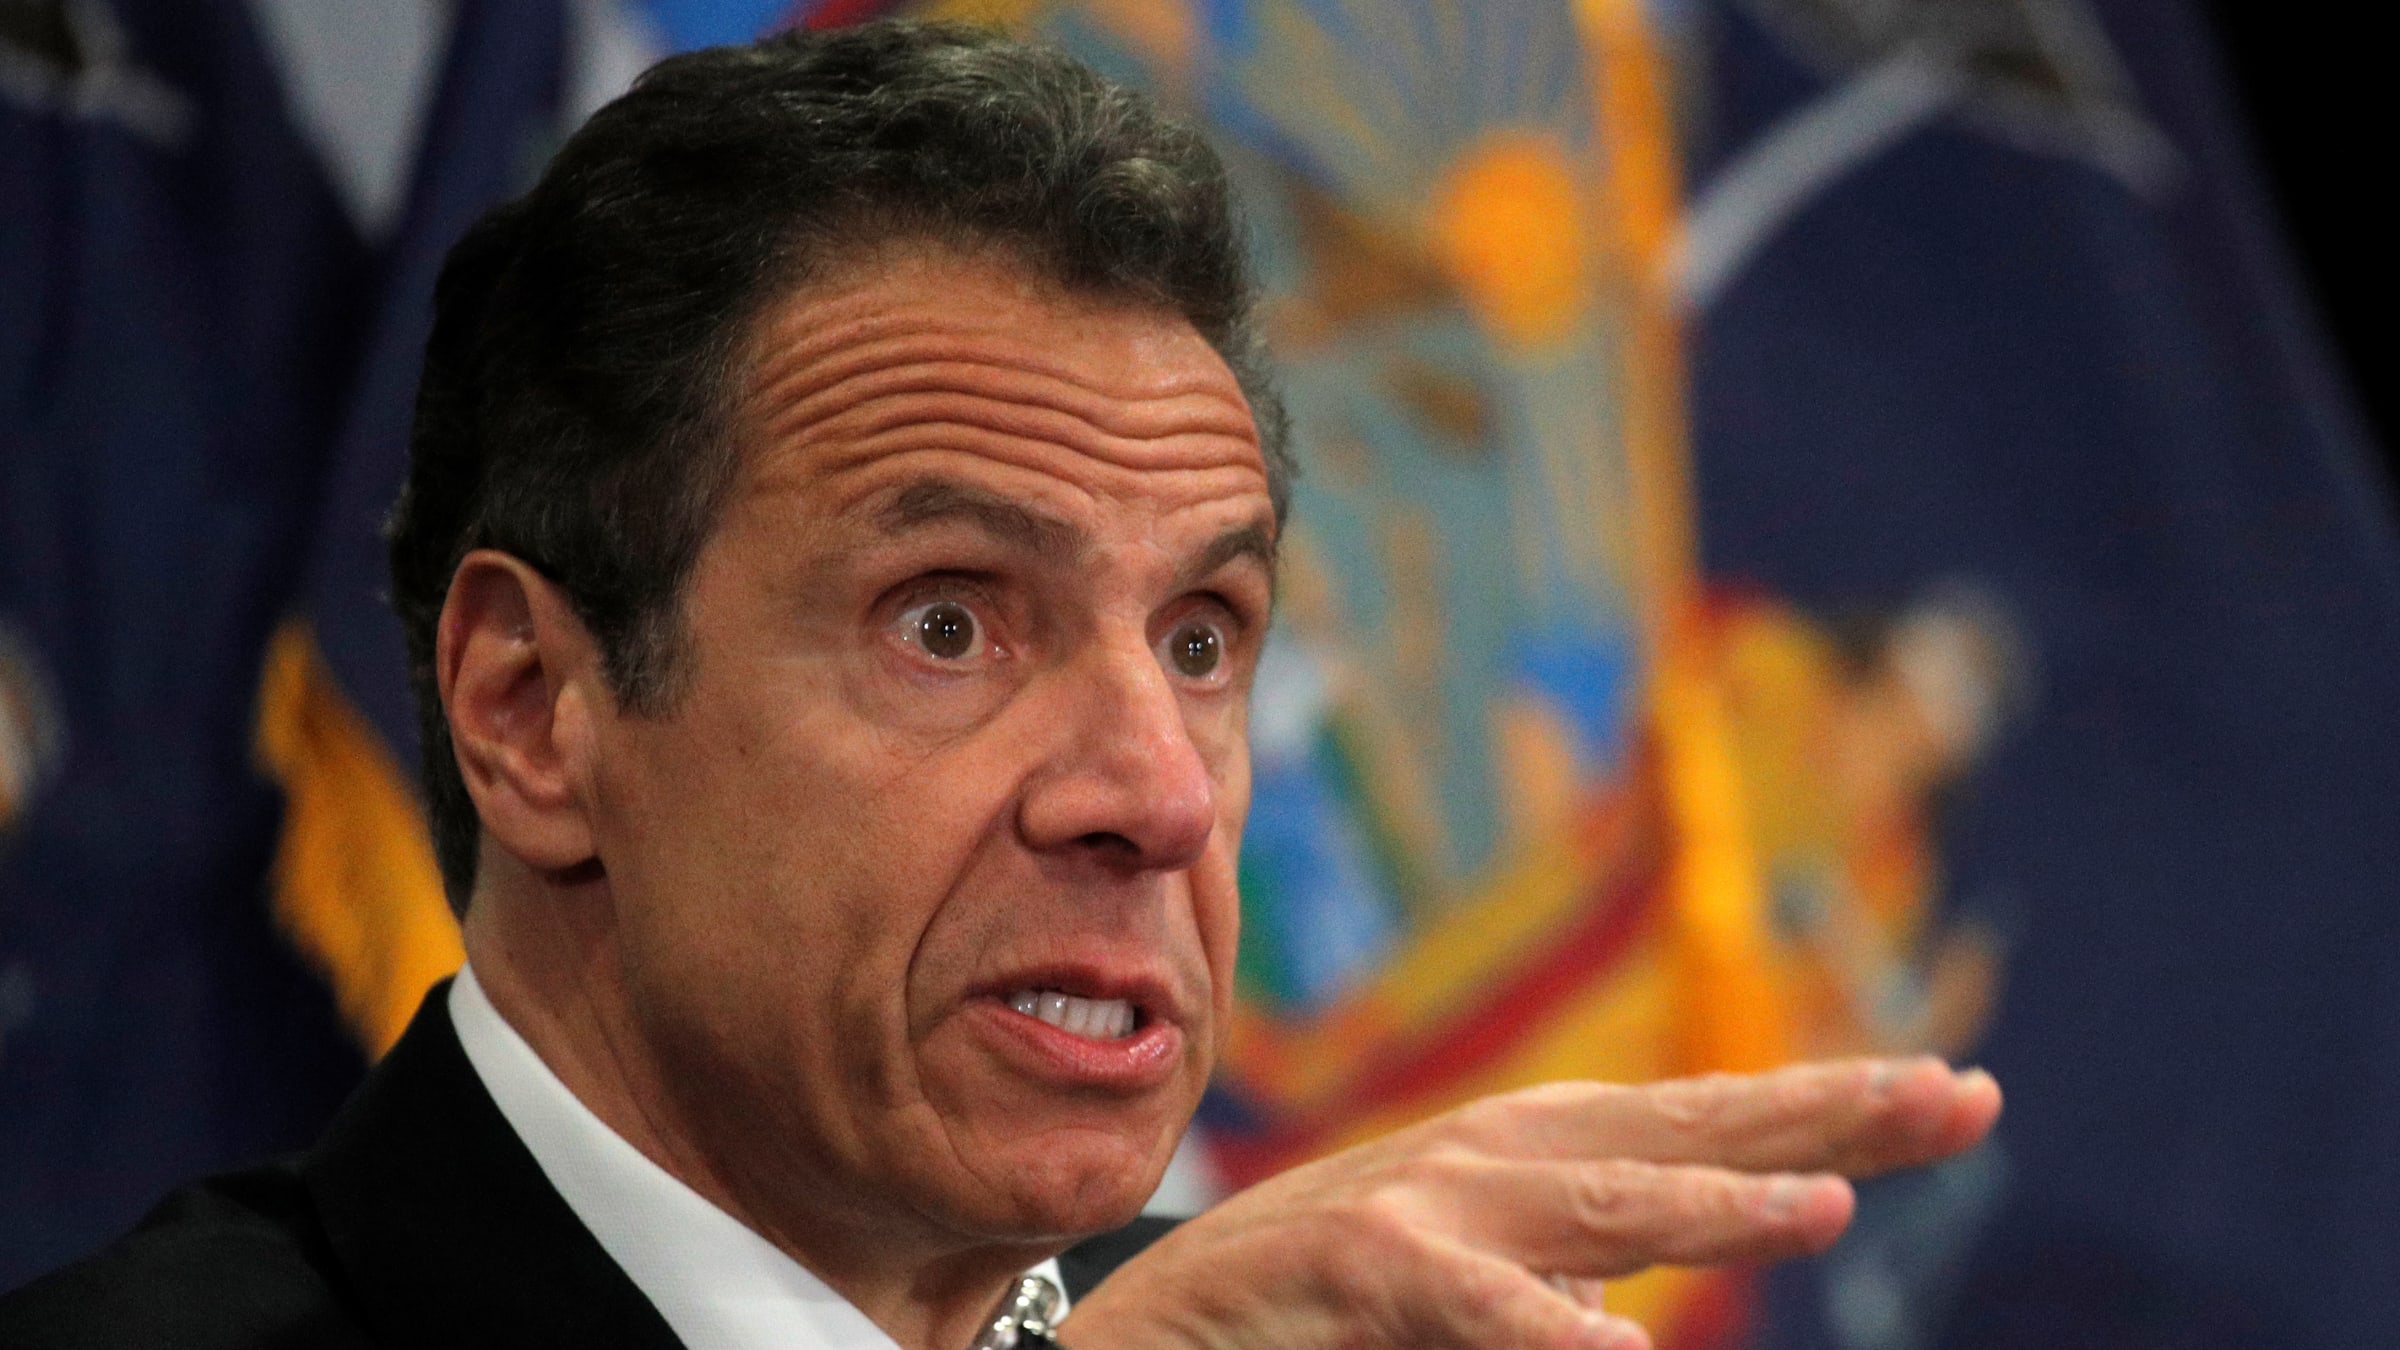 Gov. Cuomo Gets an Emmy for Pretending His COVID Response Wasn't a